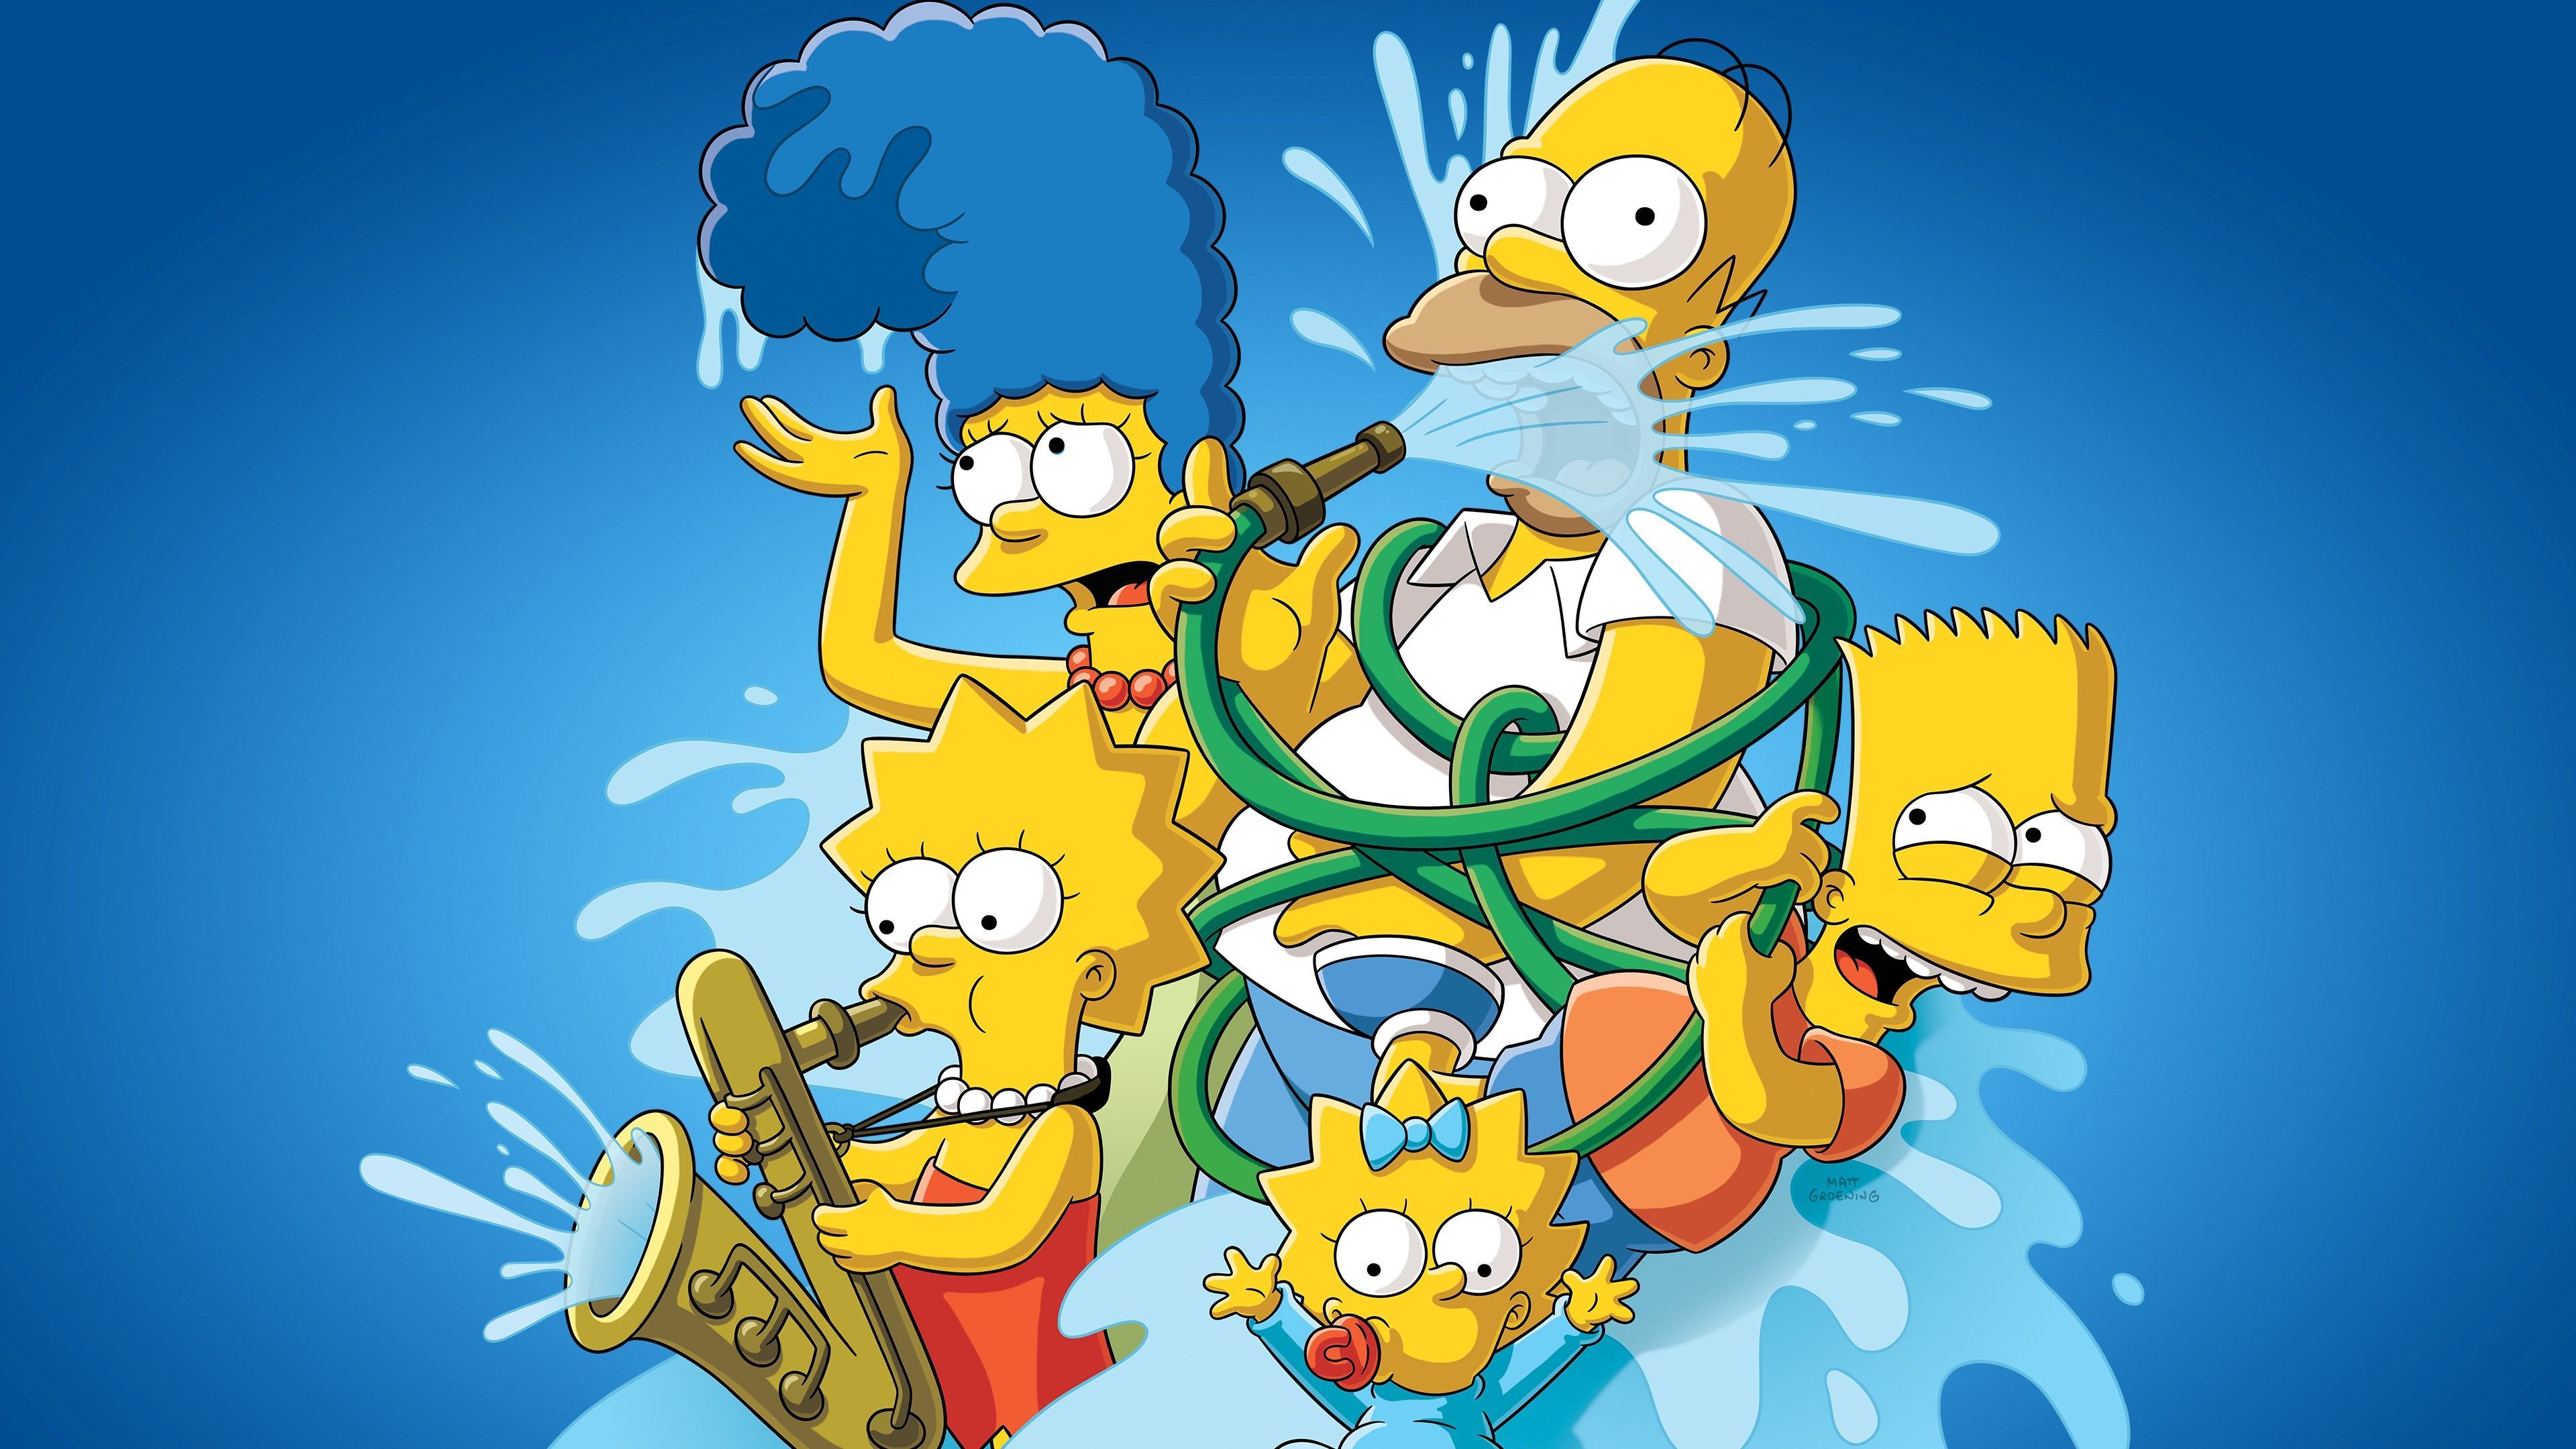 Bart simpson trippy sad Wallpapers Download